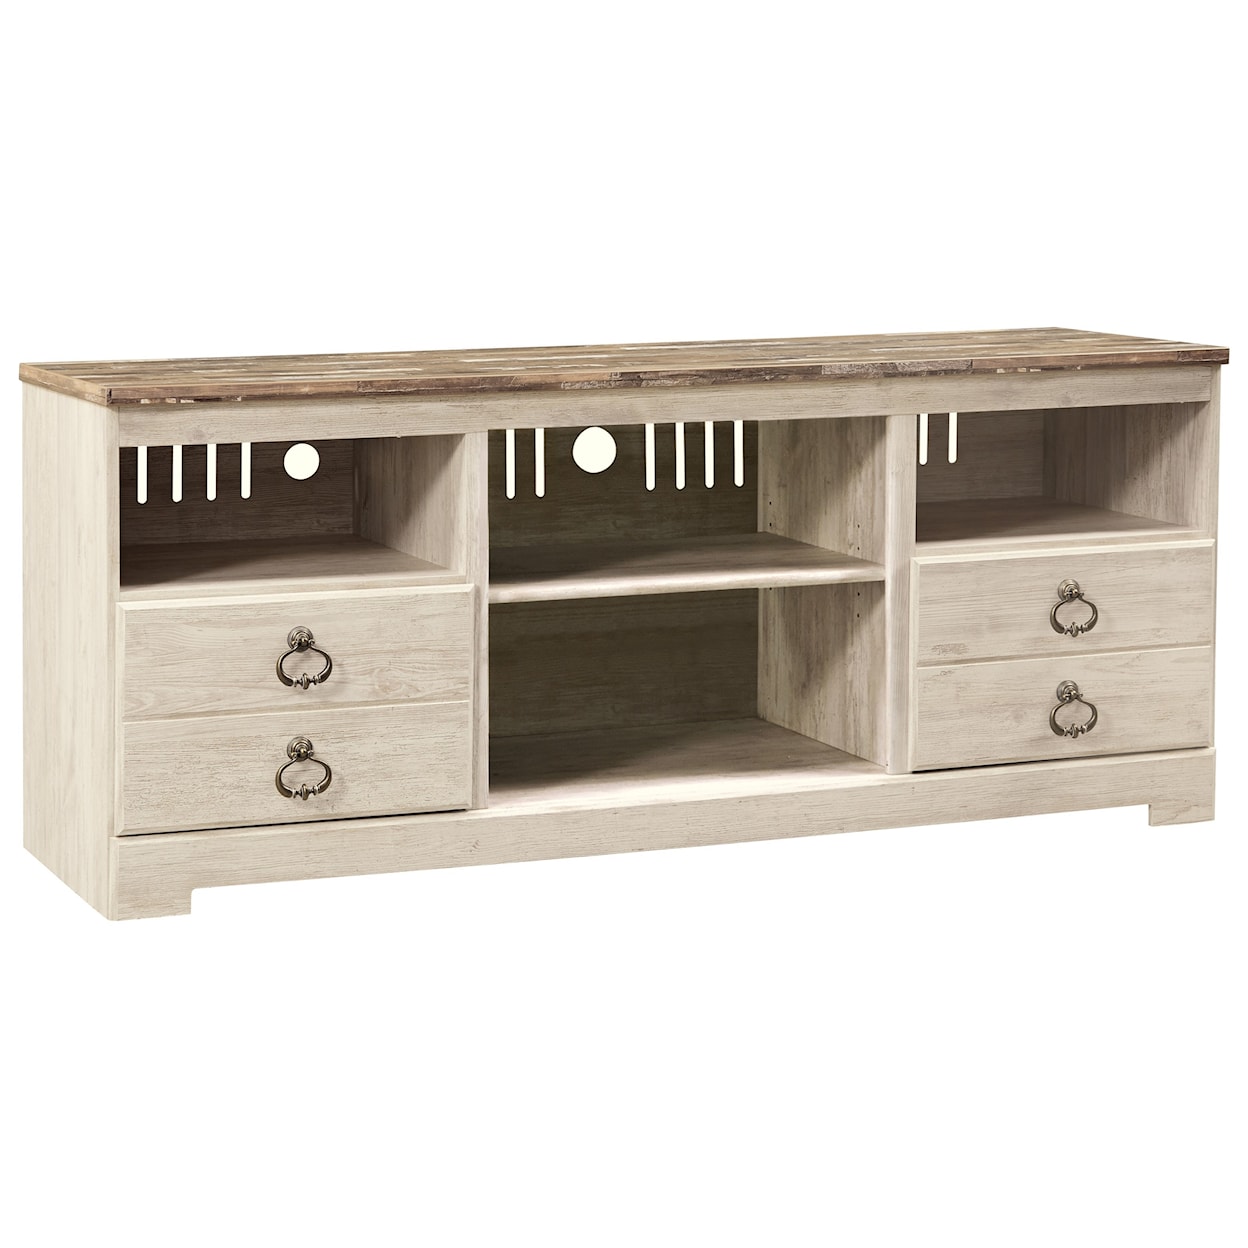 Signature Design by Ashley Willowton Large TV Stand